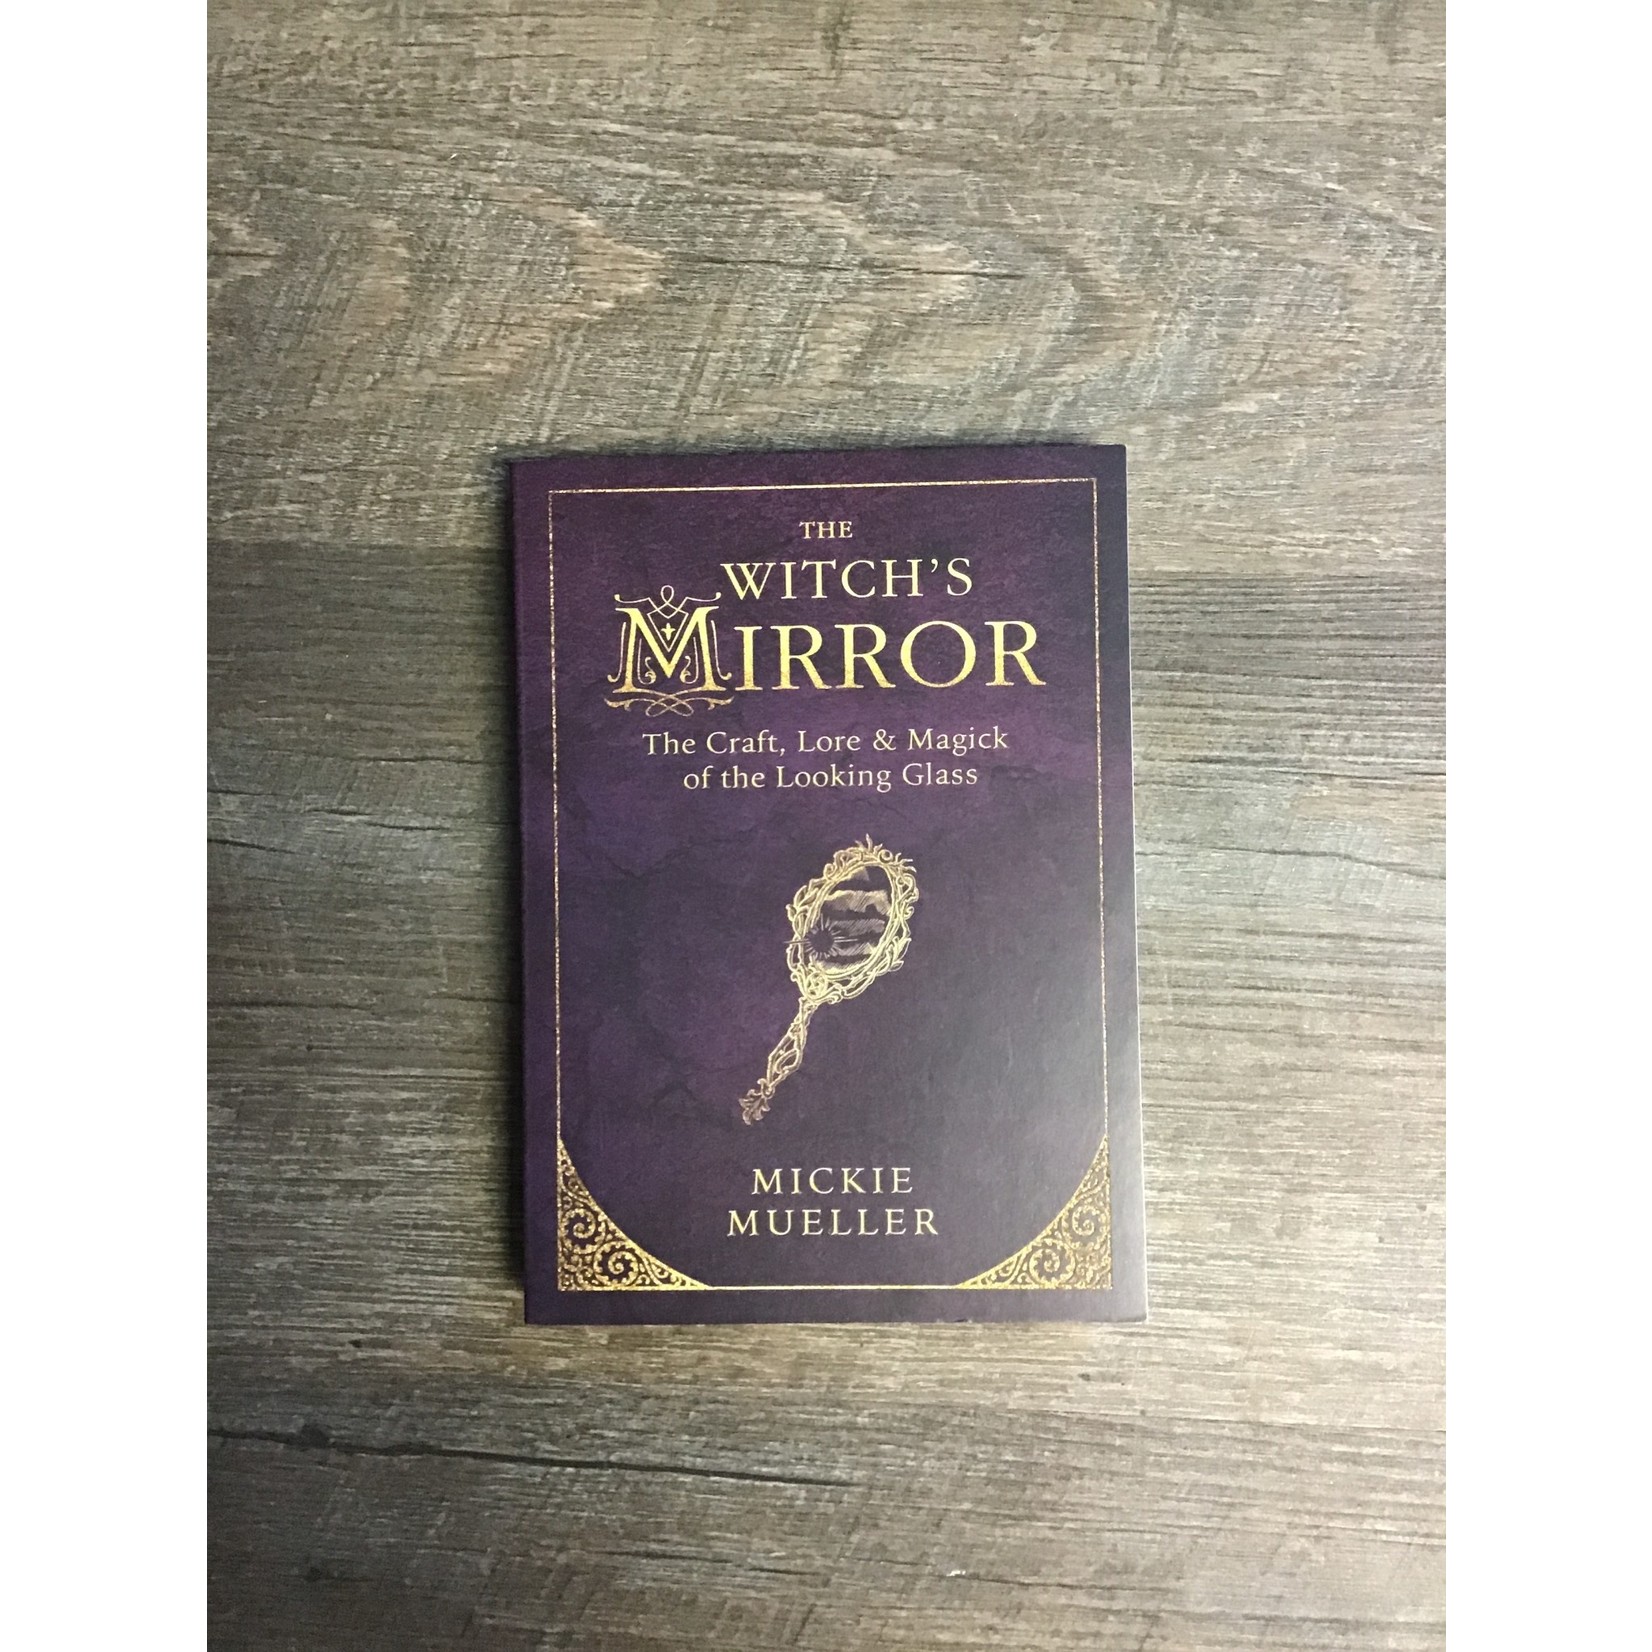 The witch's mirror